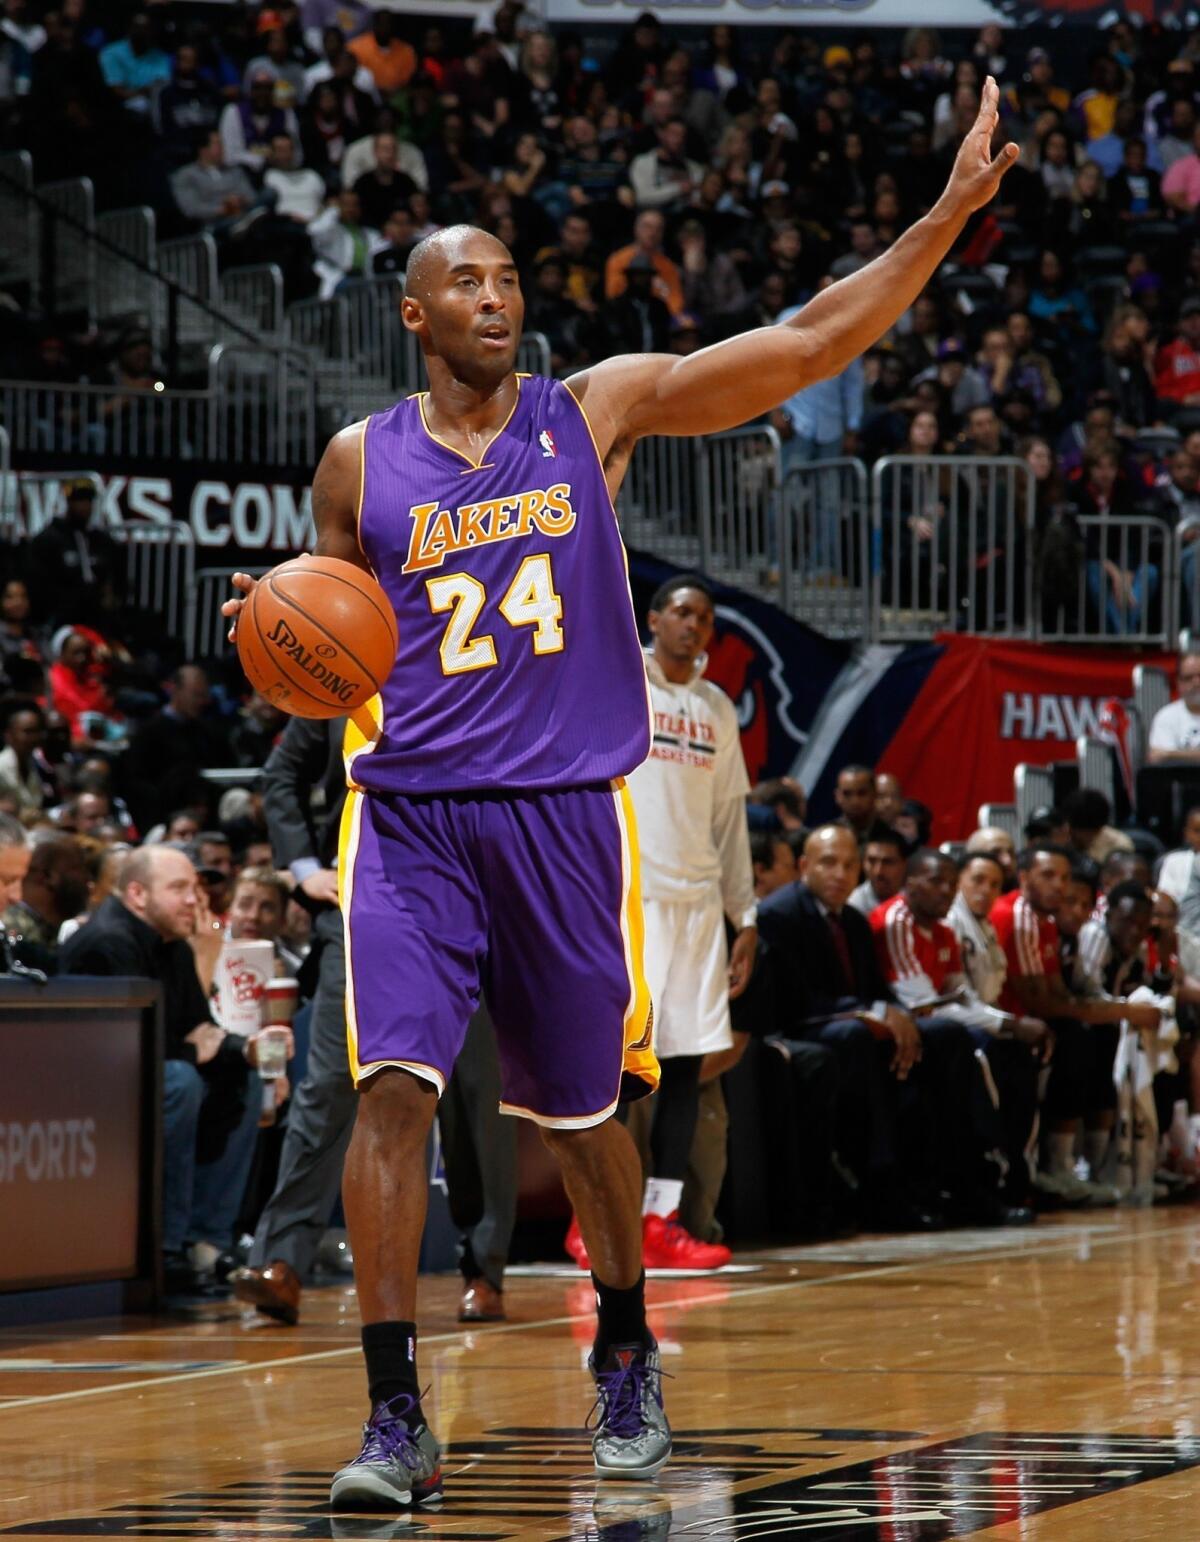 Lakers star Kobe Bryant calls out a play during the first half of Monday's game against the Atlanta Hawks.